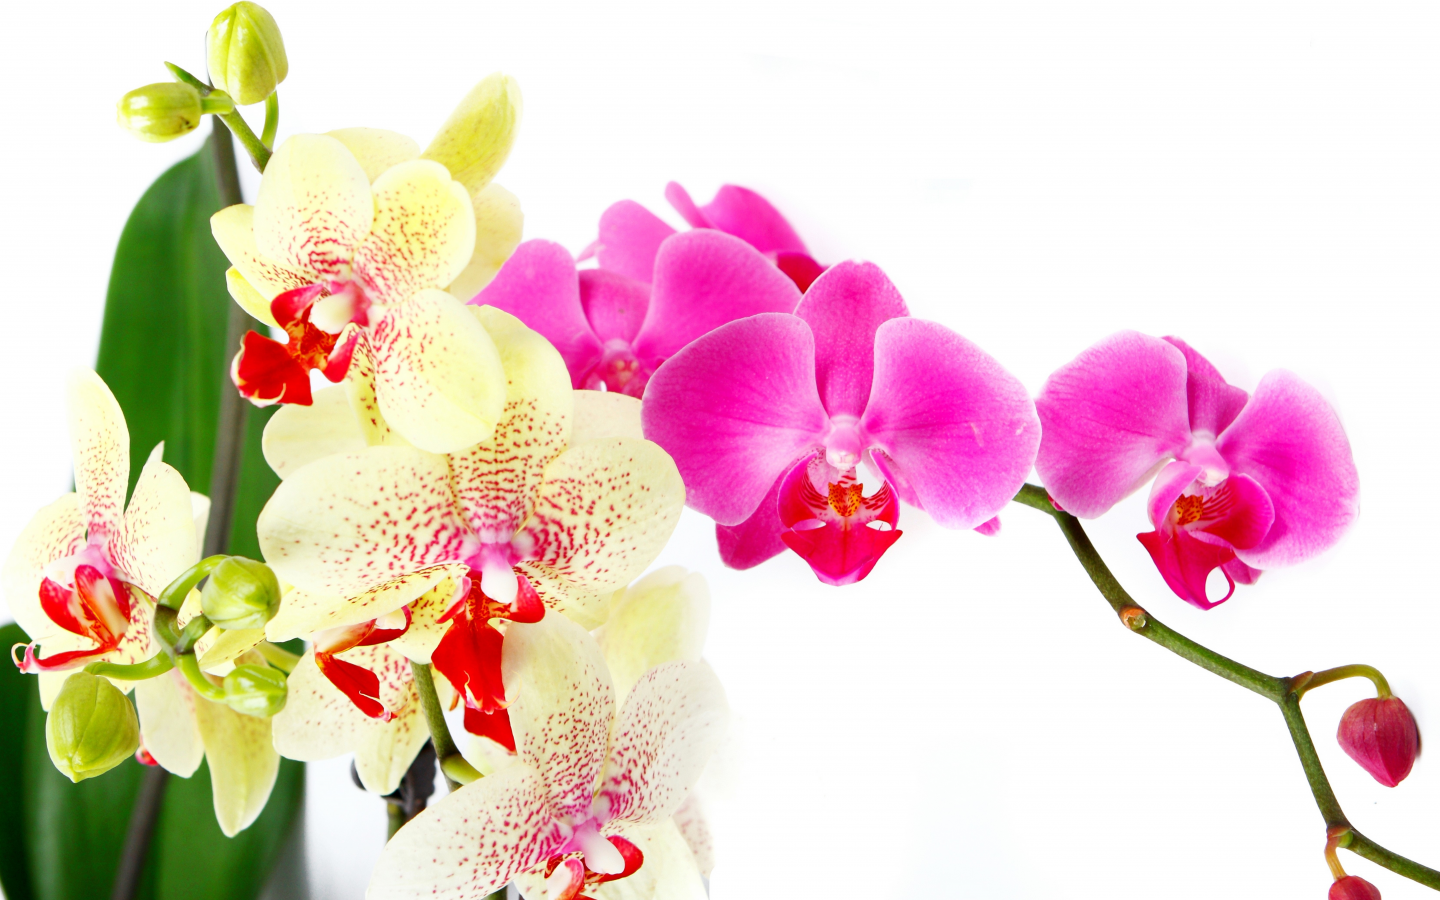 petals, beauty, bright, flowers, white, цветы, branch, tenderness, orchid, pink, phalaenopsis